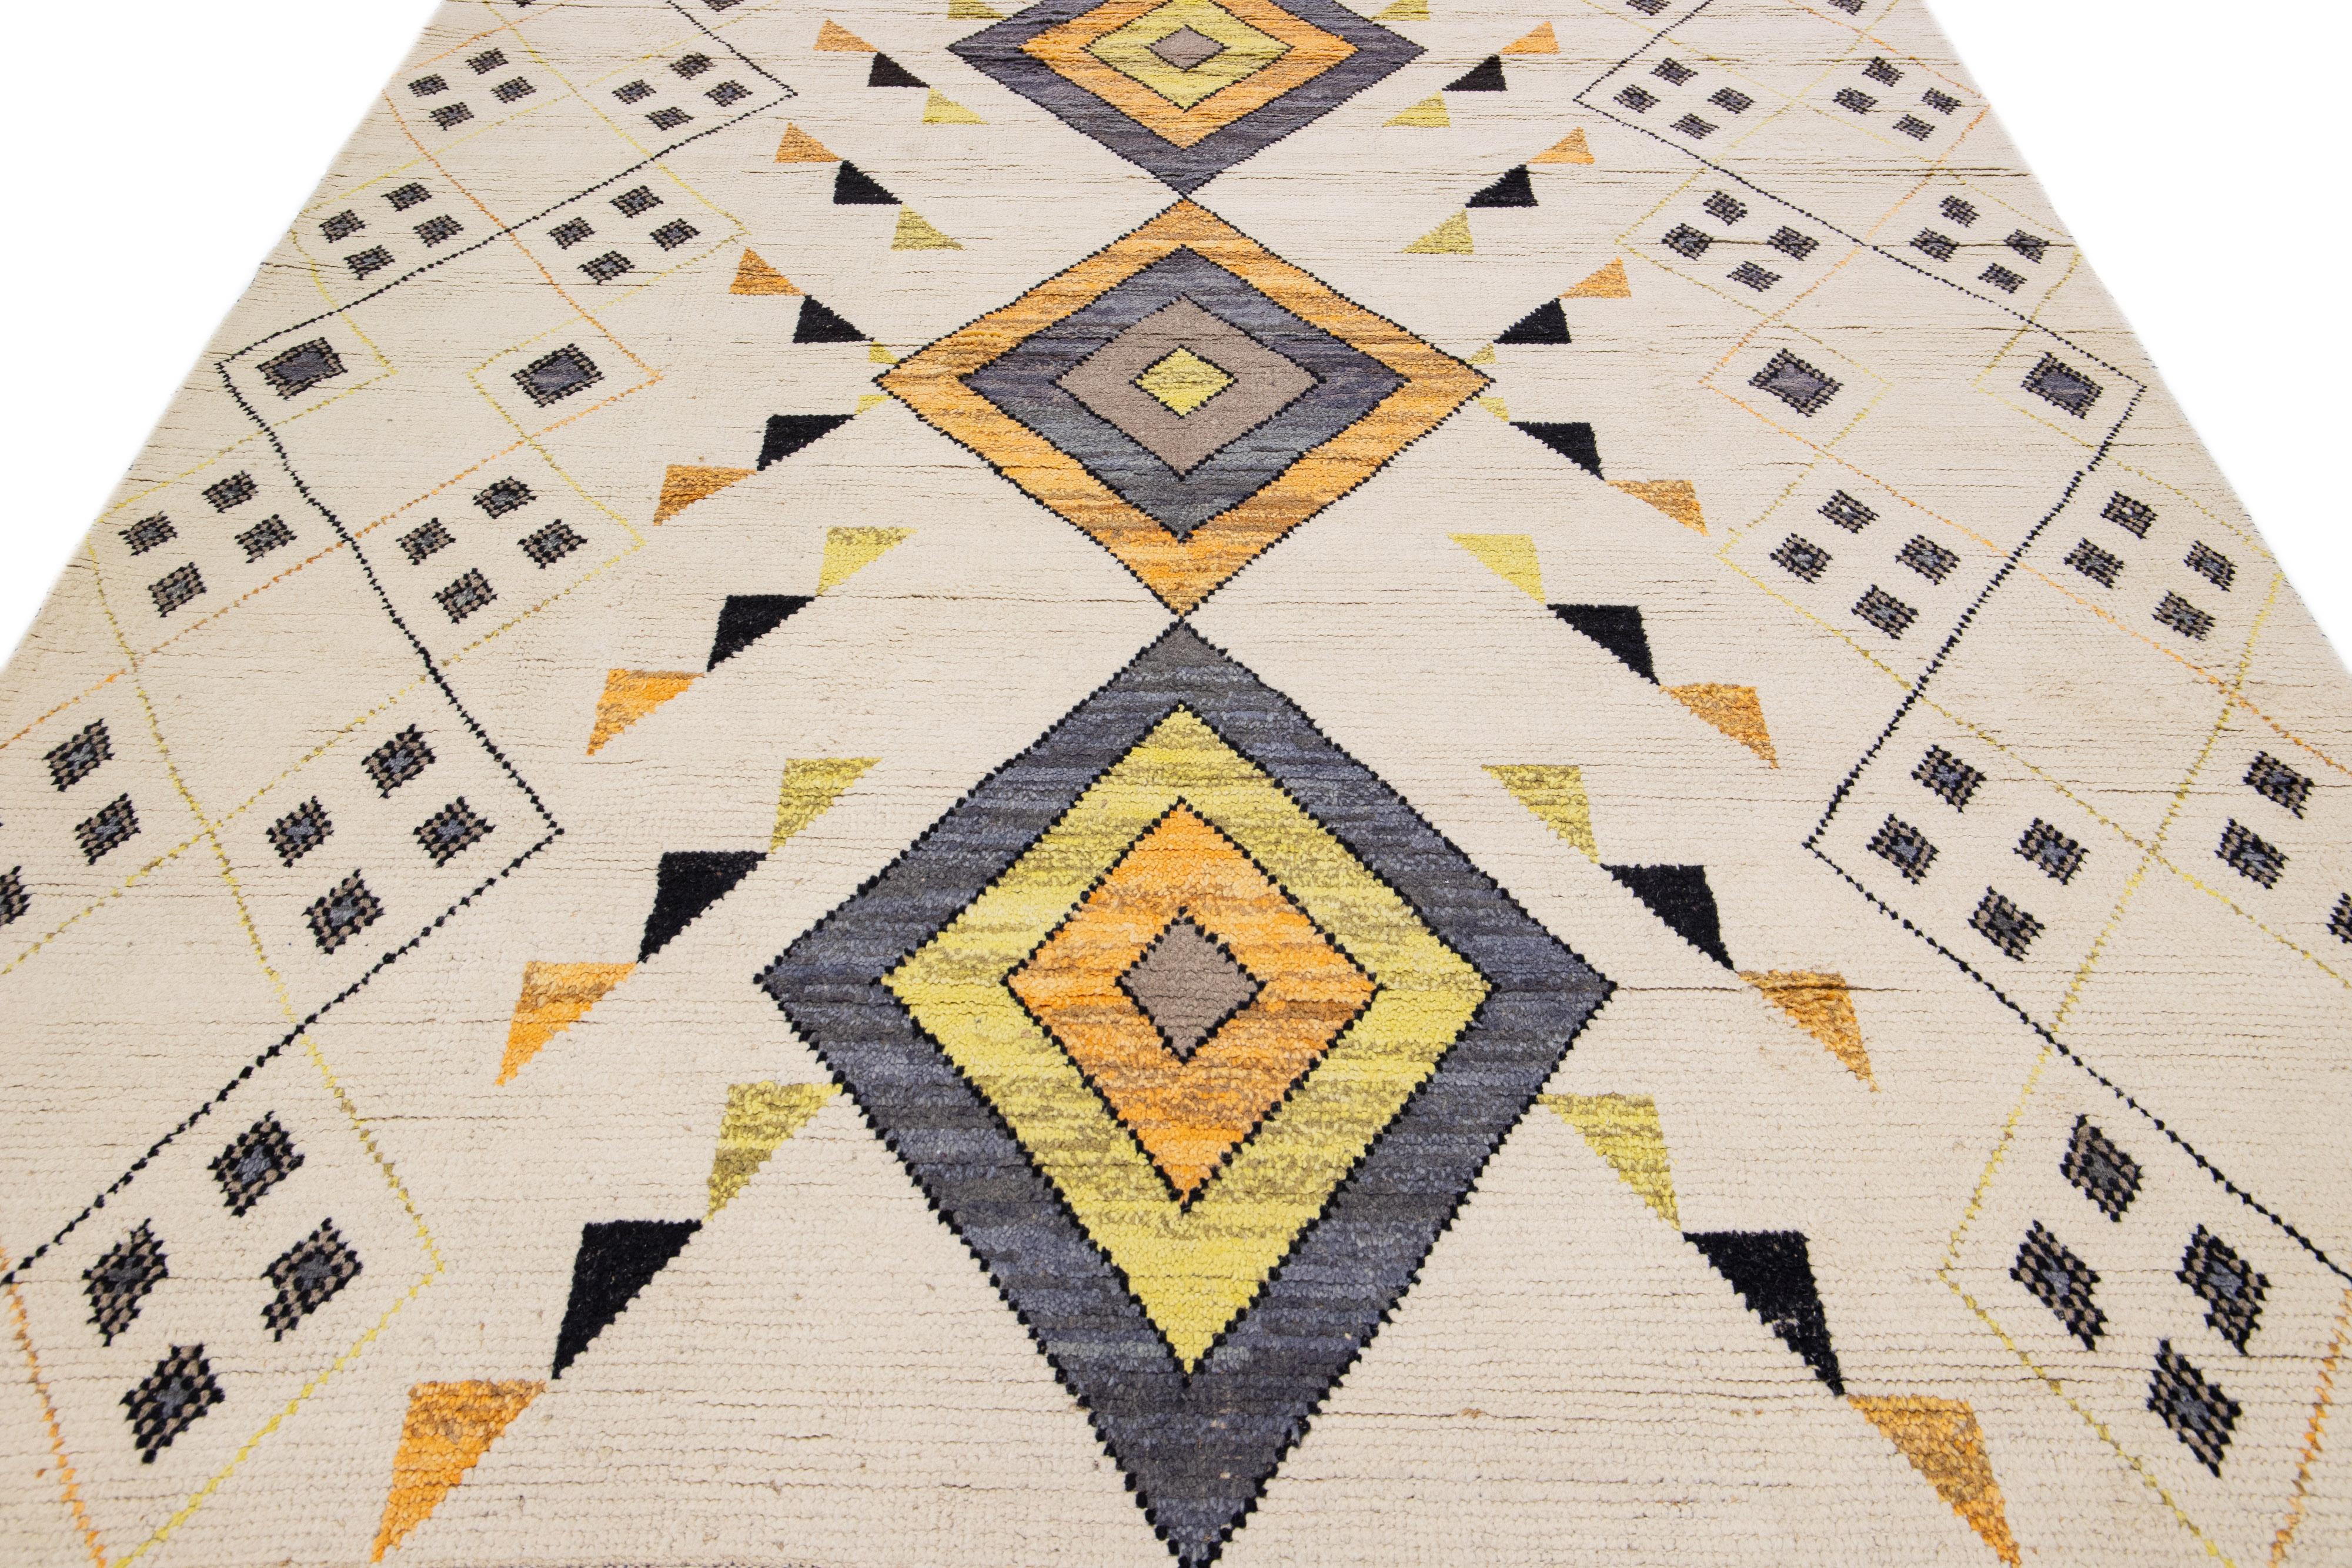 Beautiful modern Moroccan-style hand-knotted wool rug with a beige field. This piece has orange, gray, and yellow accent colors in a gorgeous tribal design.

This rug measures 8' x 10'1